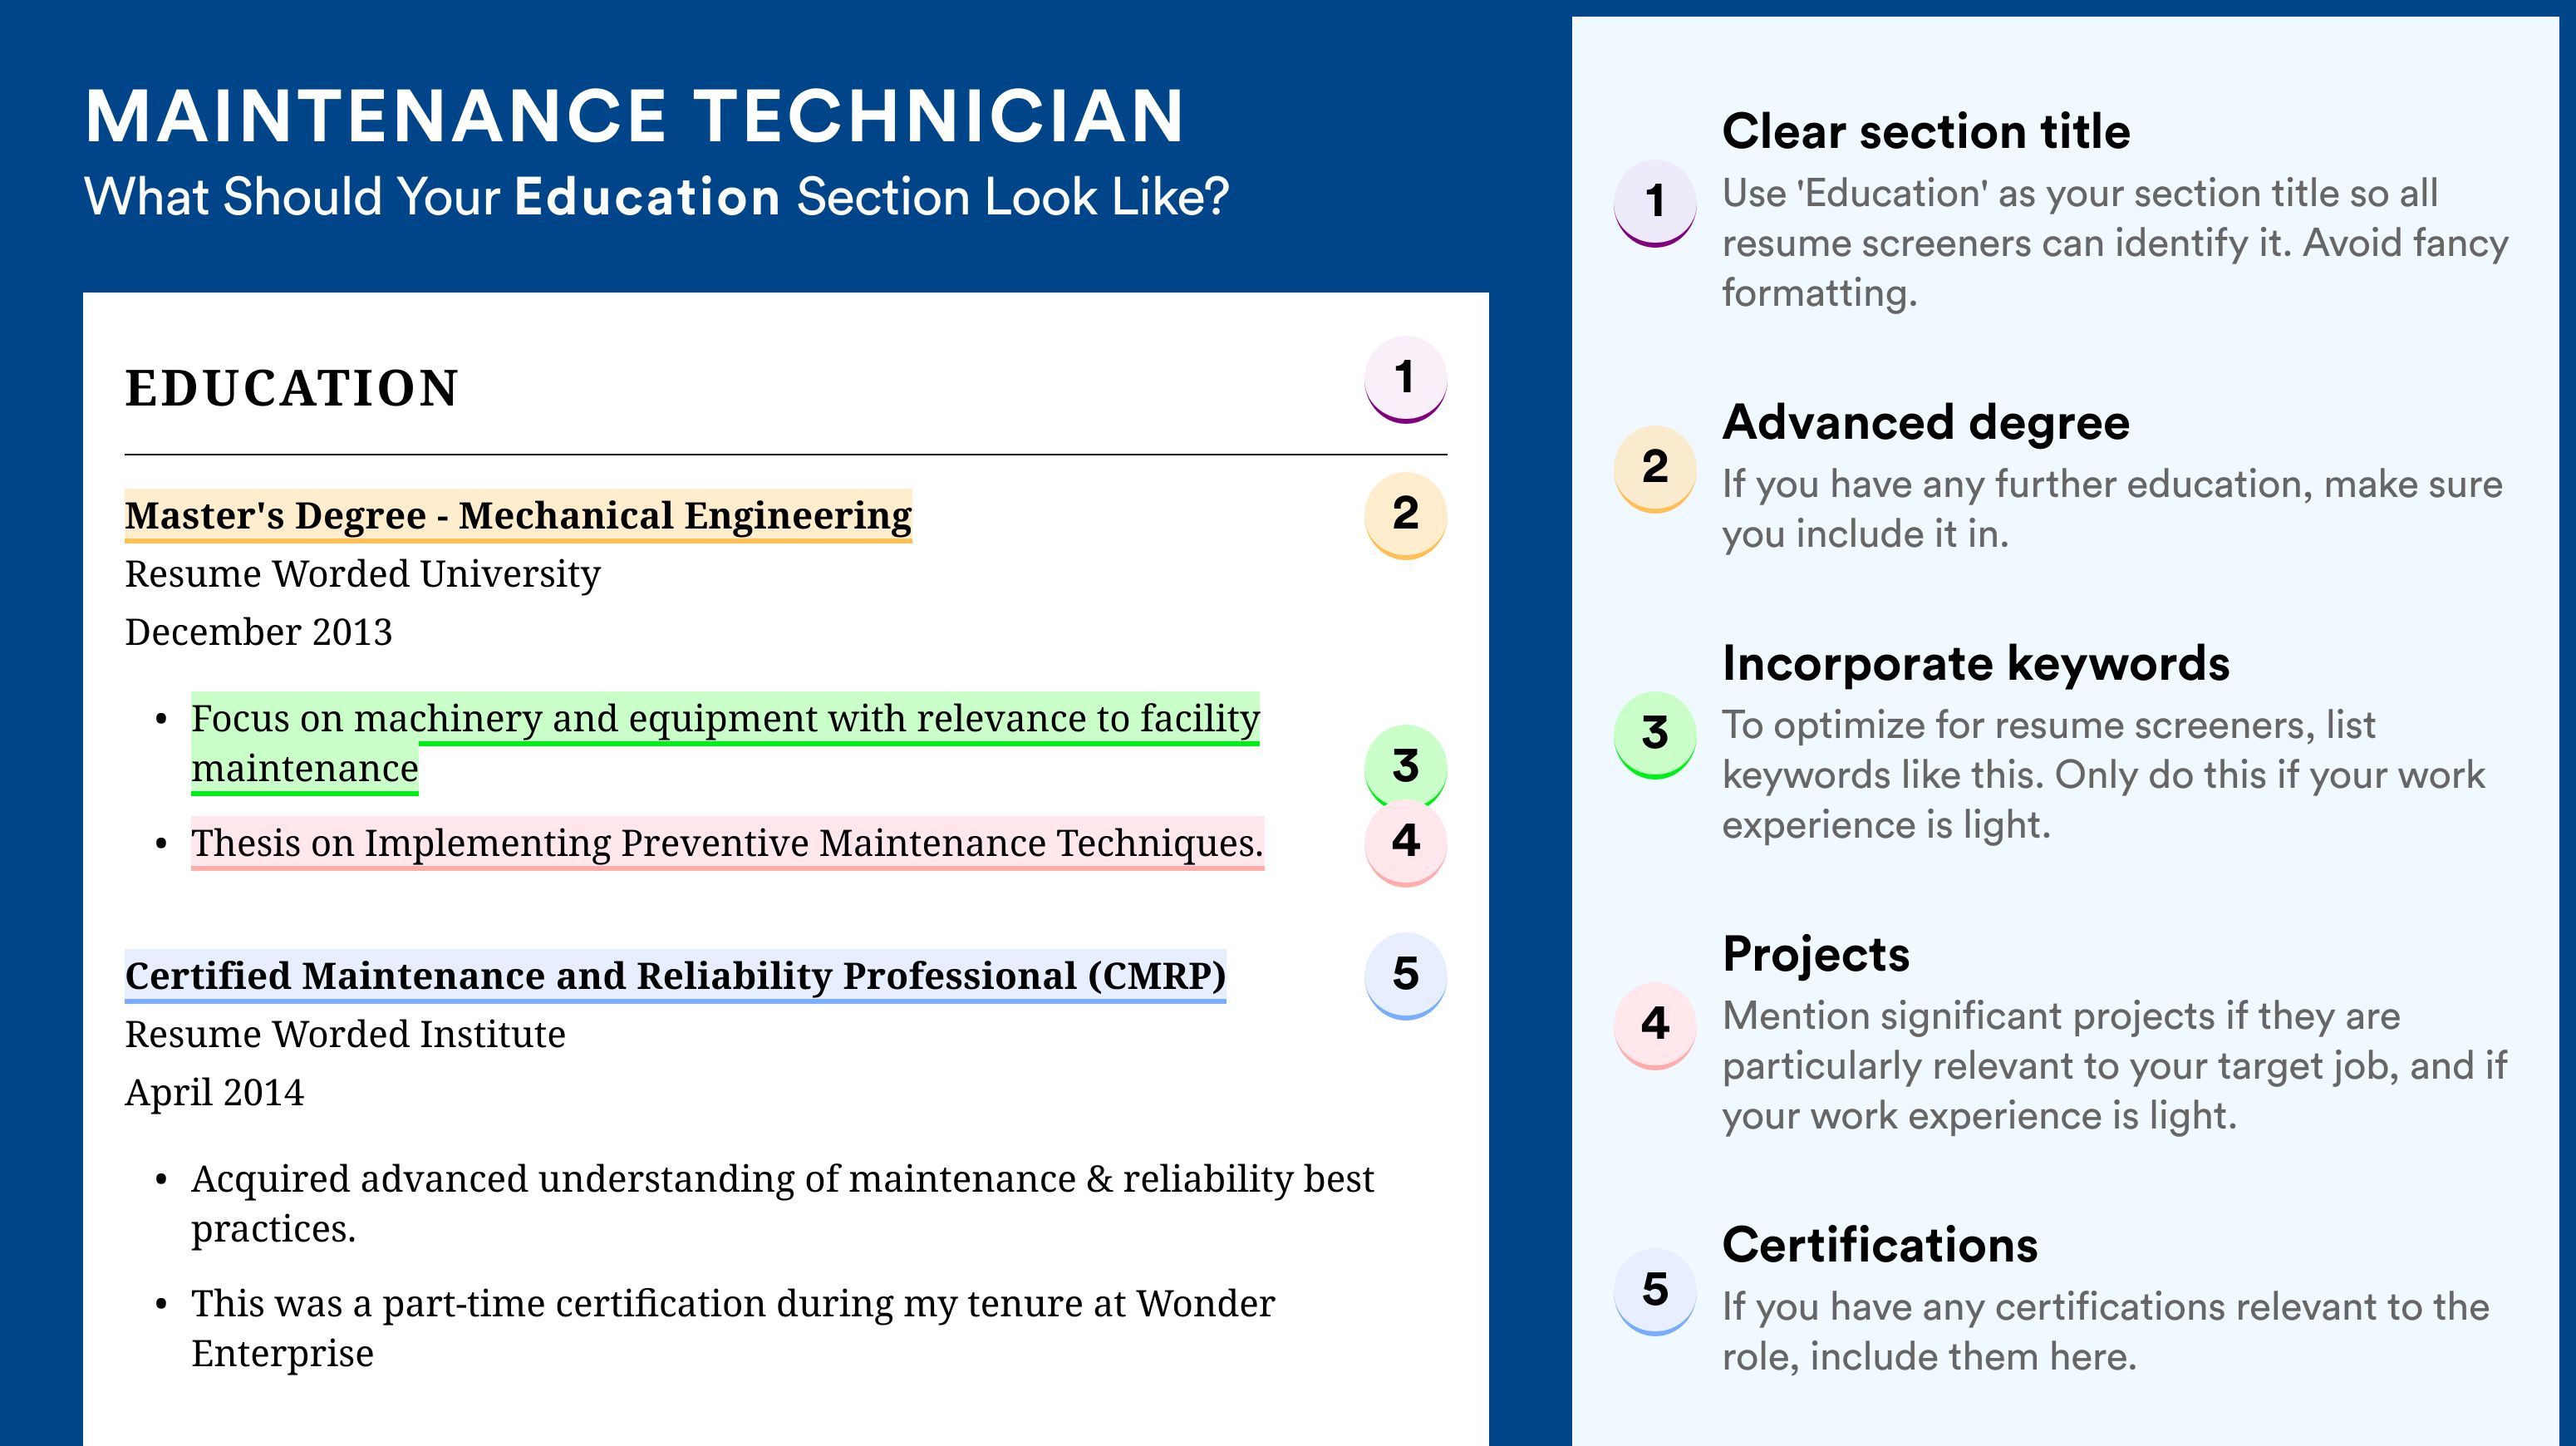 How To Write An Education Section - Maintenance Technician Roles